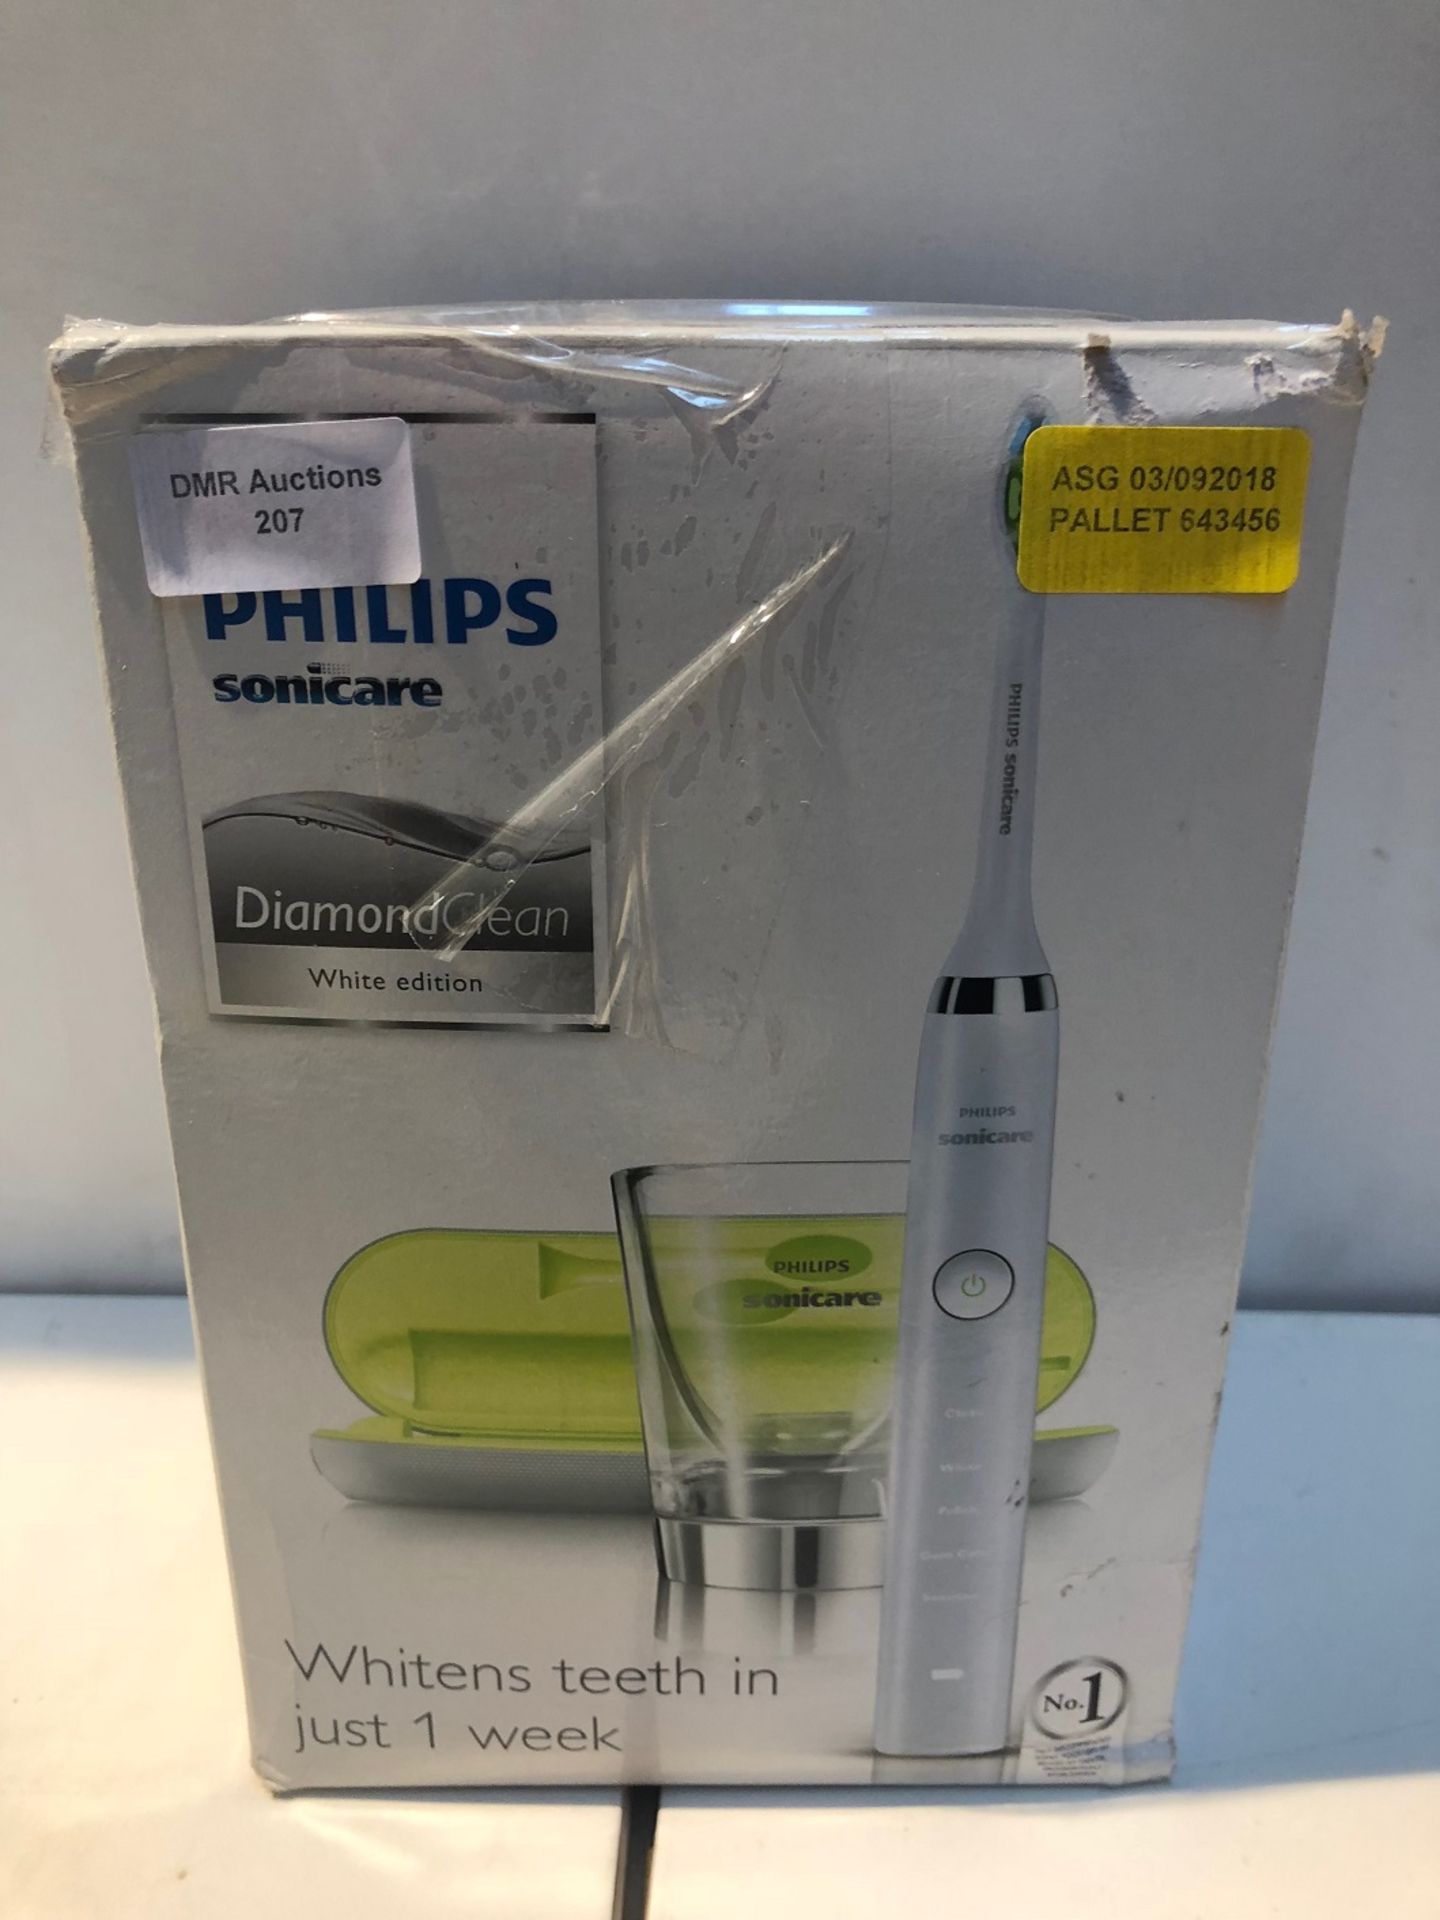 1 / RRP £170.00 PHILIPS DIAMOND CLEAN, TOOTHBRUSH / ASG 03.09.18 PALLET 643456 (VIEWING HIGHLY